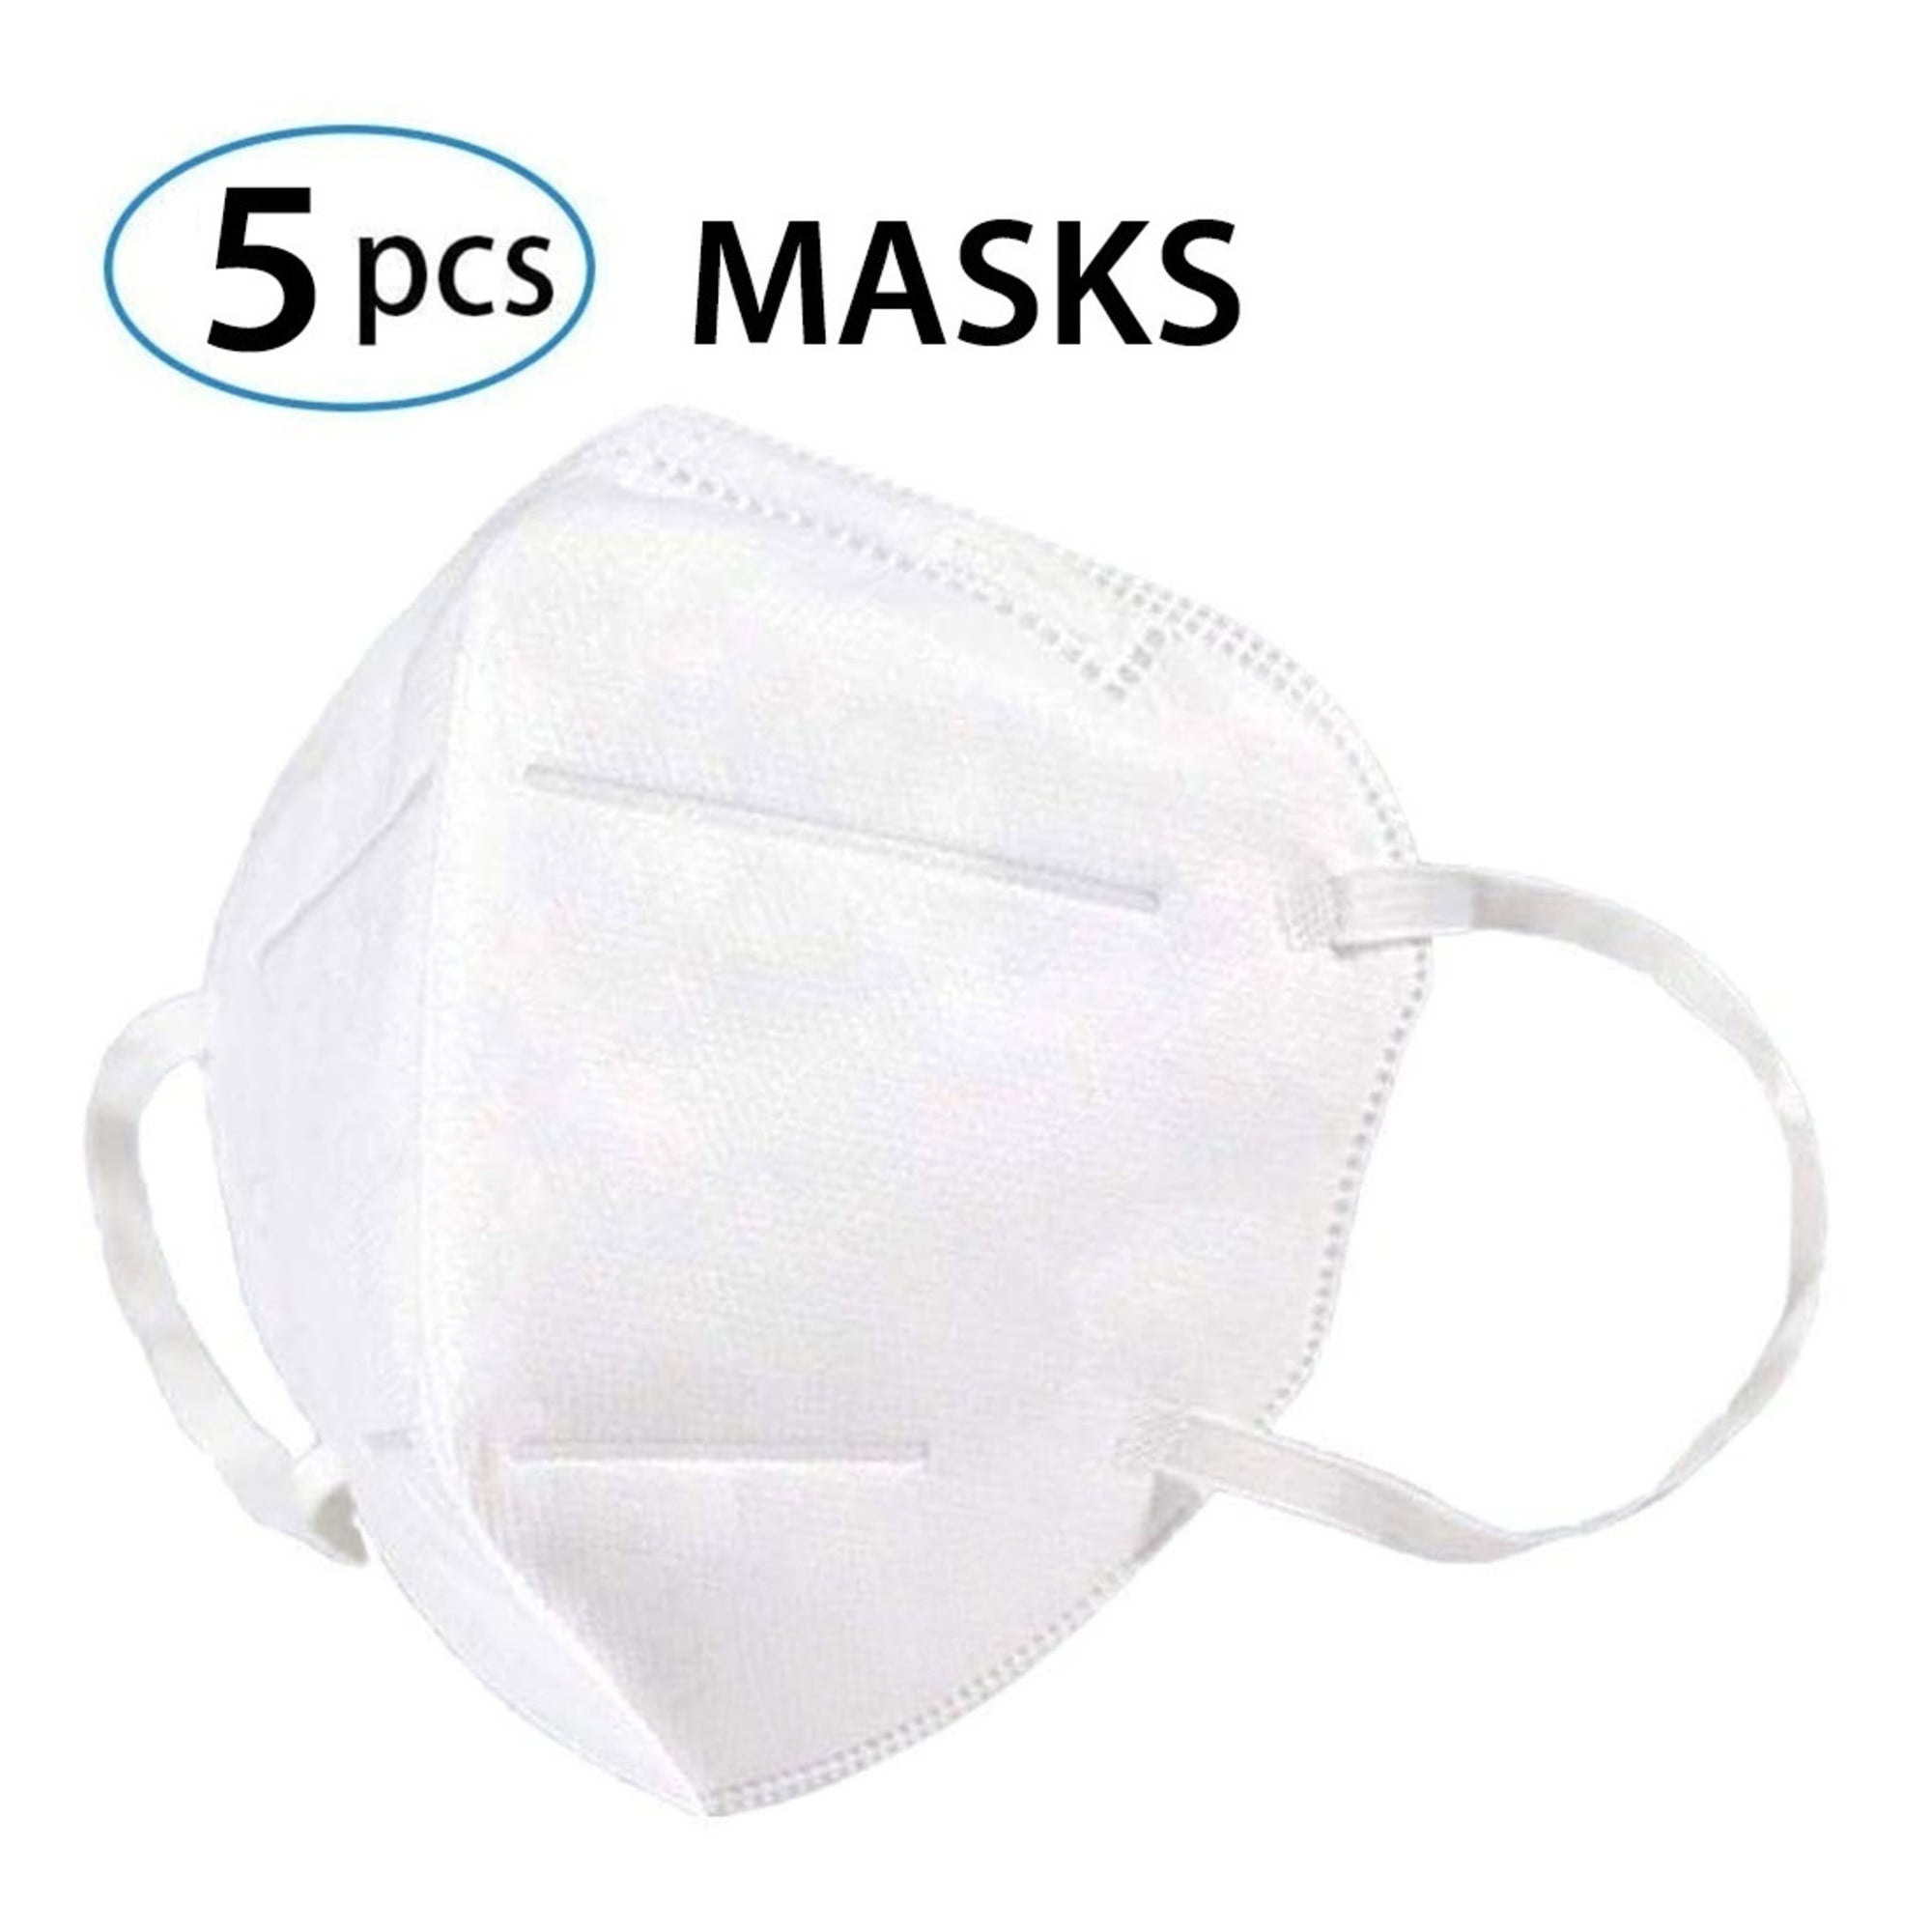 Black and White Masks for Adults, 4 Ply Disposable Kf94 Face Mask Filter  Protection Face Masks - China Face Mask, Kf94 Mask